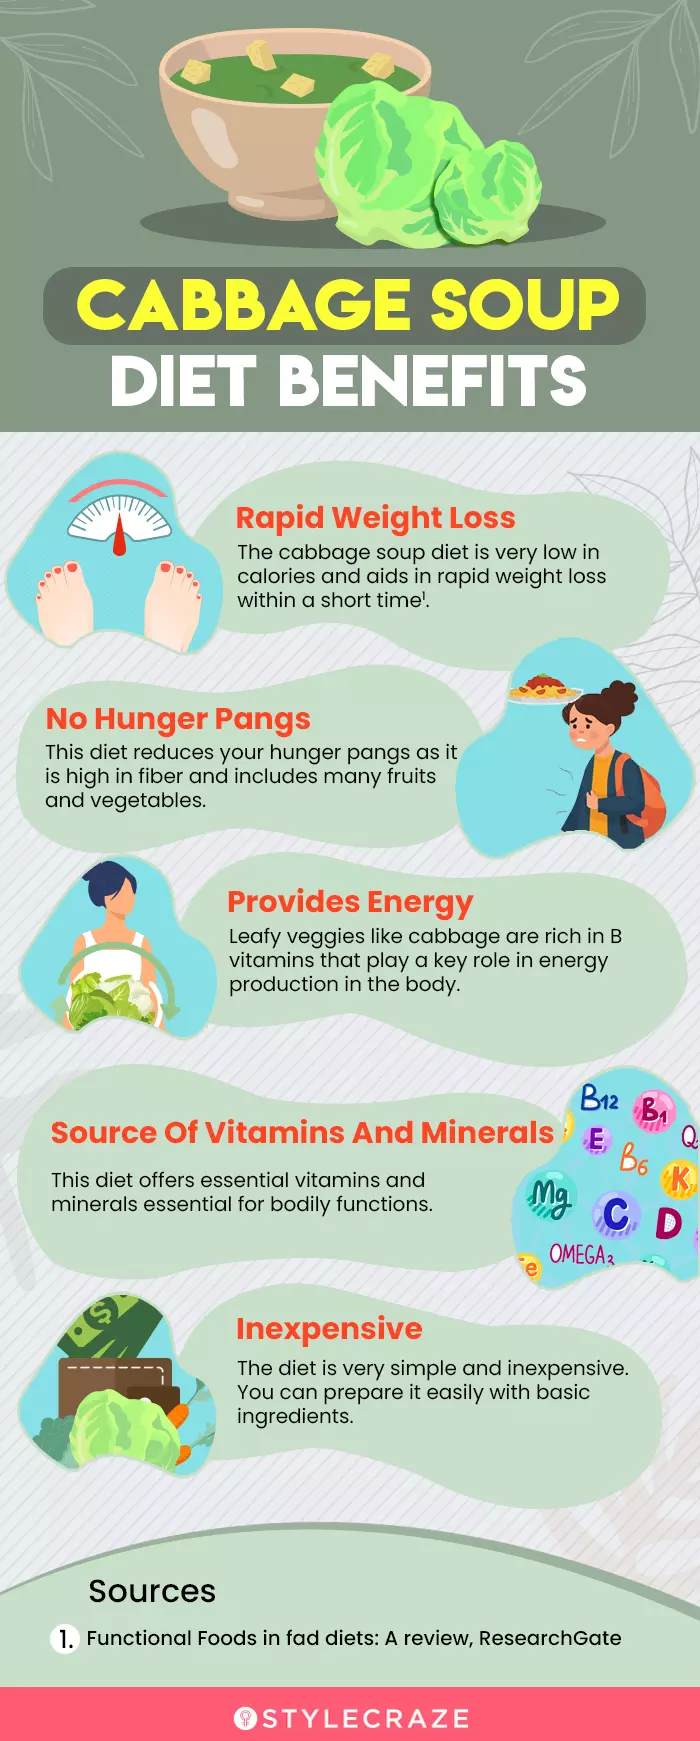 cabbage soup diet benefits (infographic)